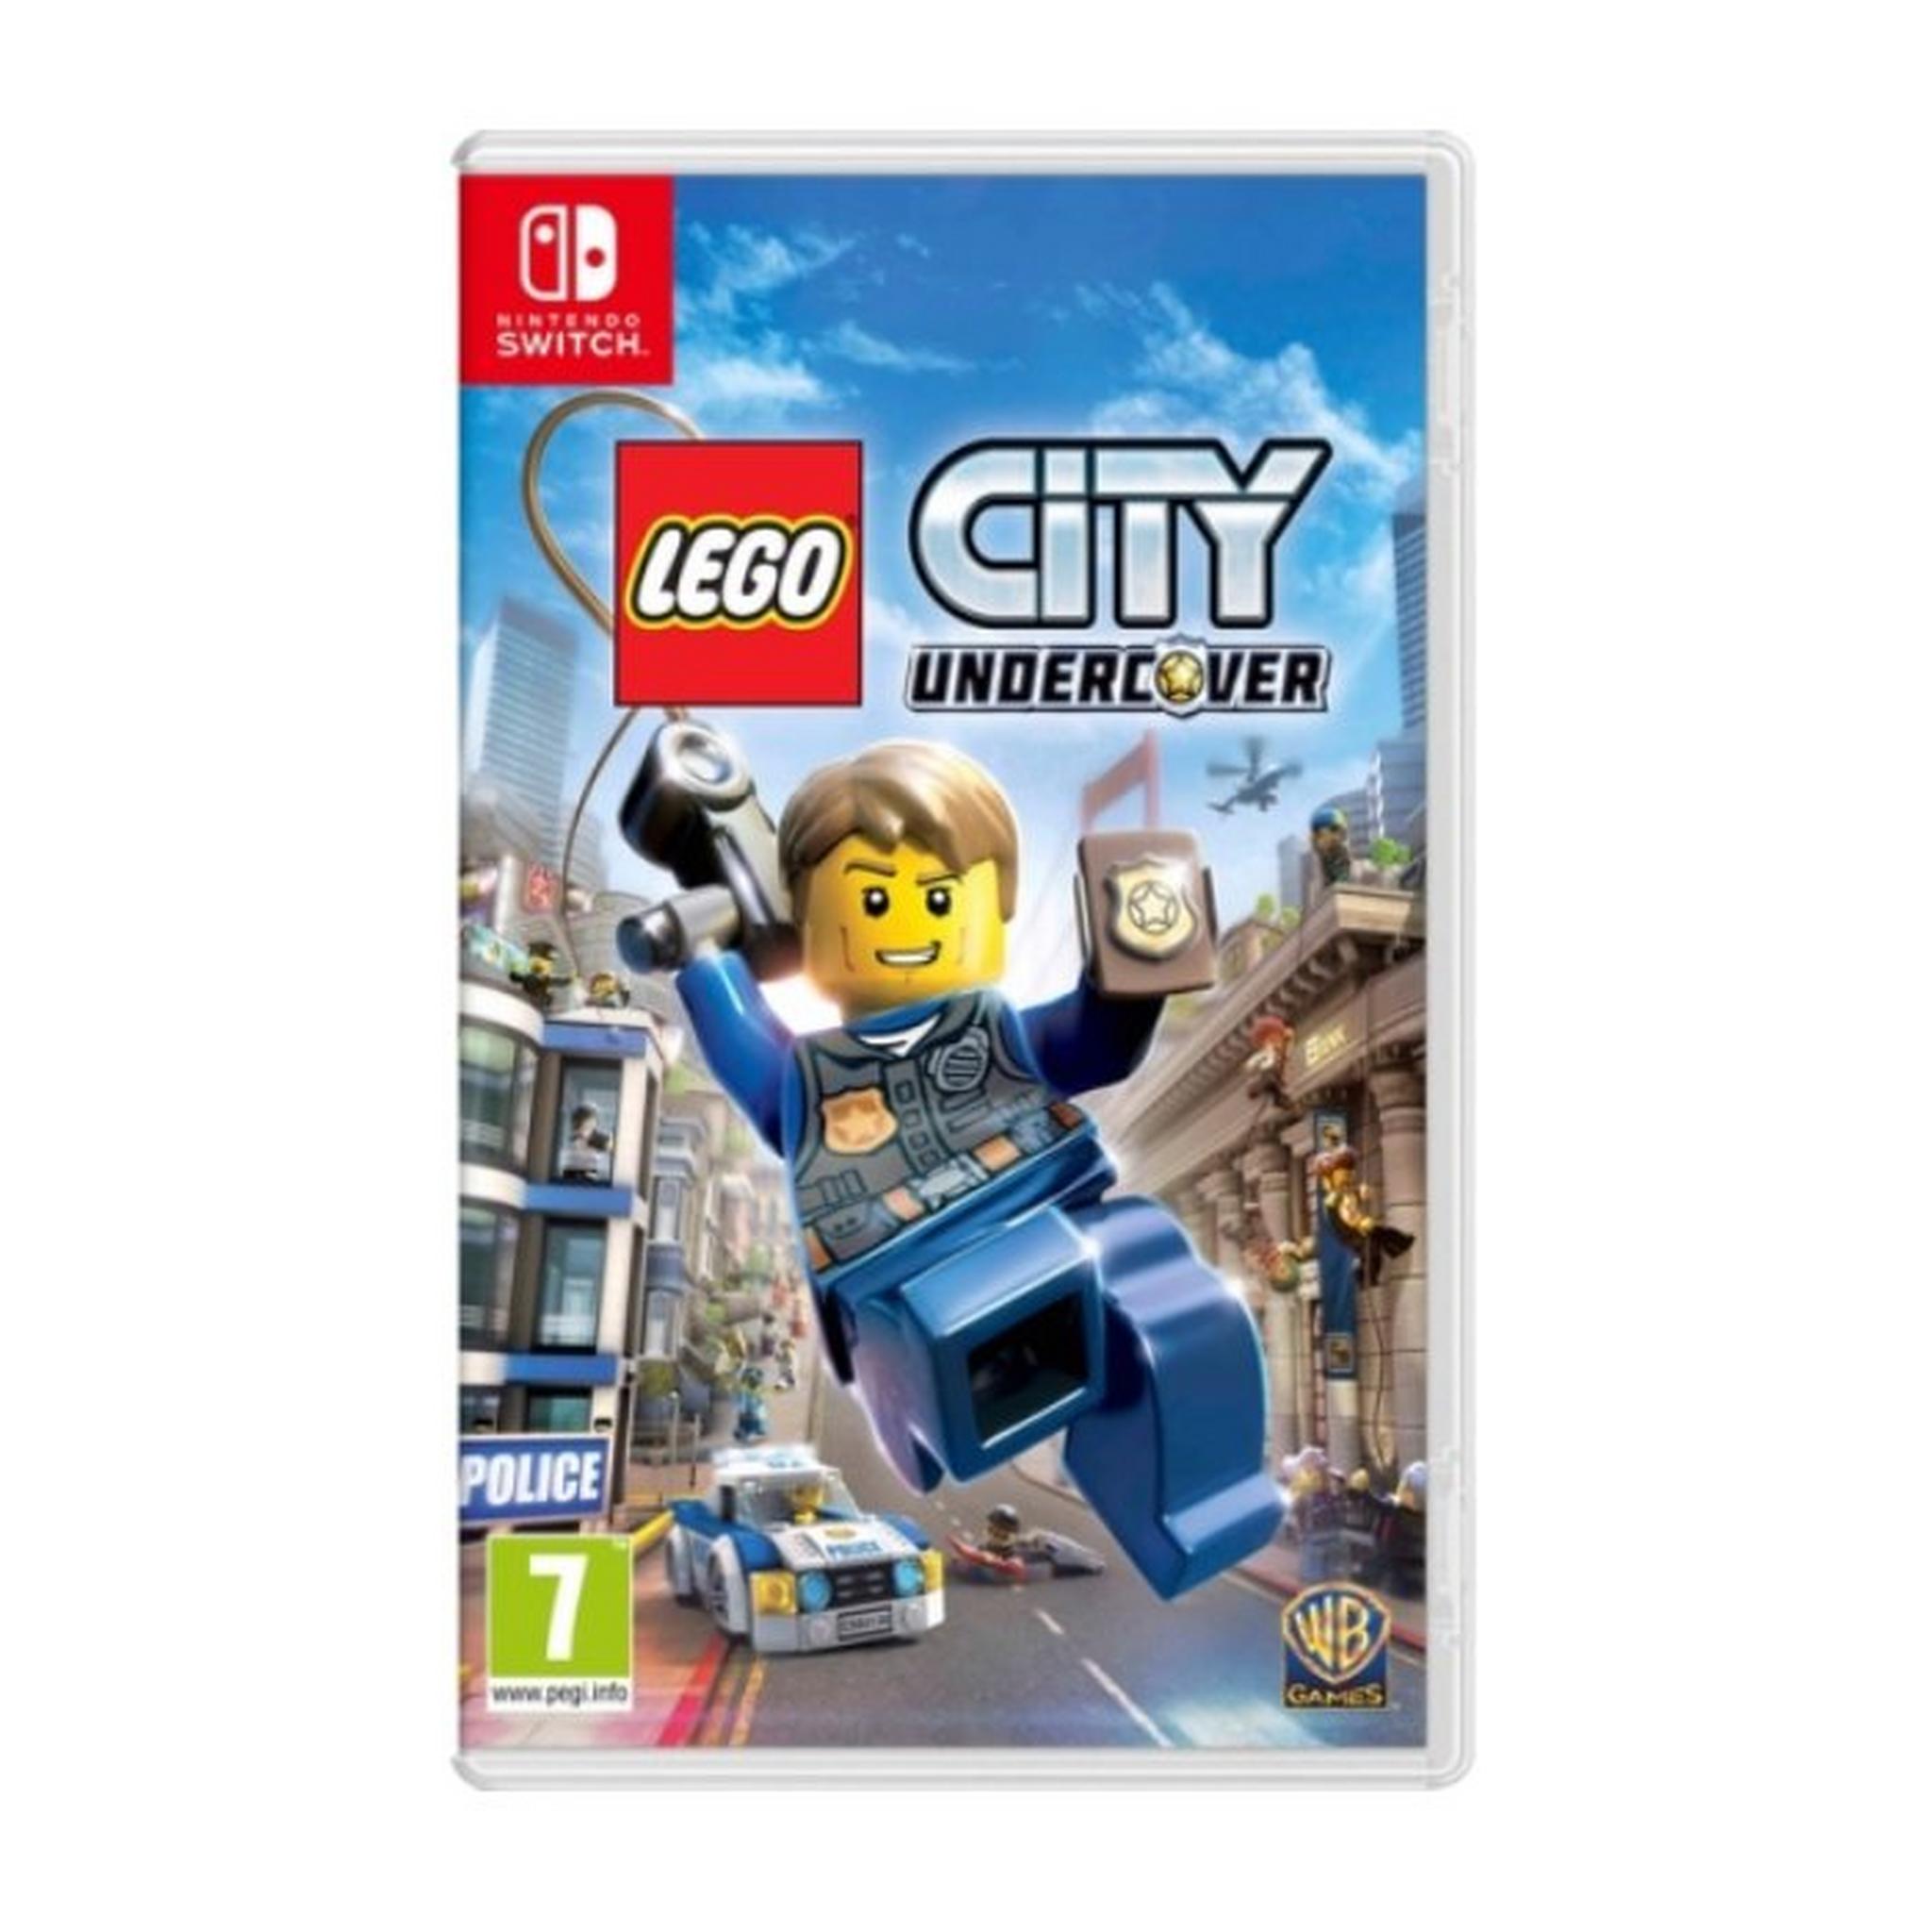 Lego City Undercover - Nintendo Switch Game